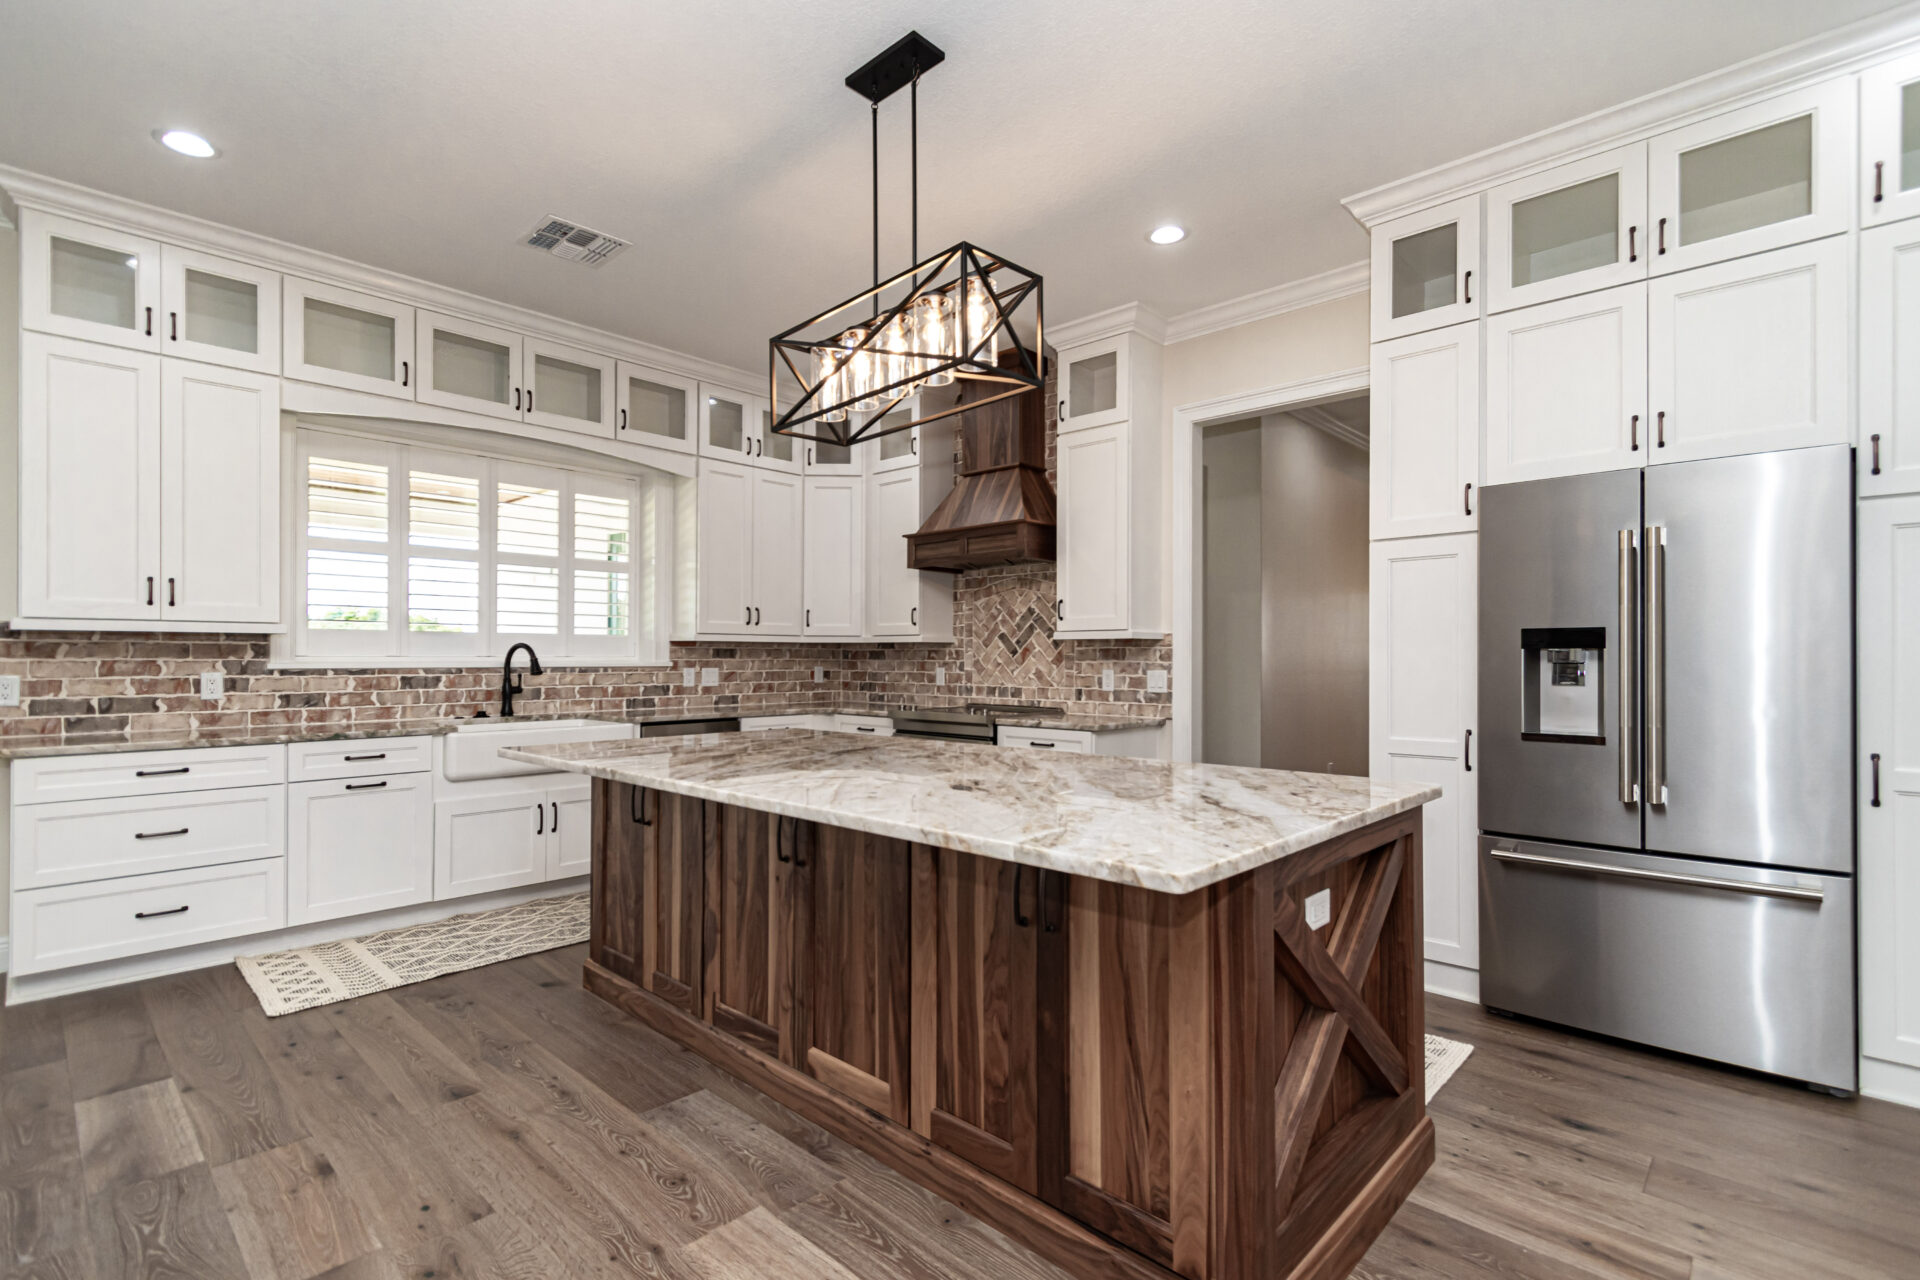 Luxury Kitchen in the 4602 Custom Home Model Built By Jason Boutwell Construction - 4000+ square foot homes